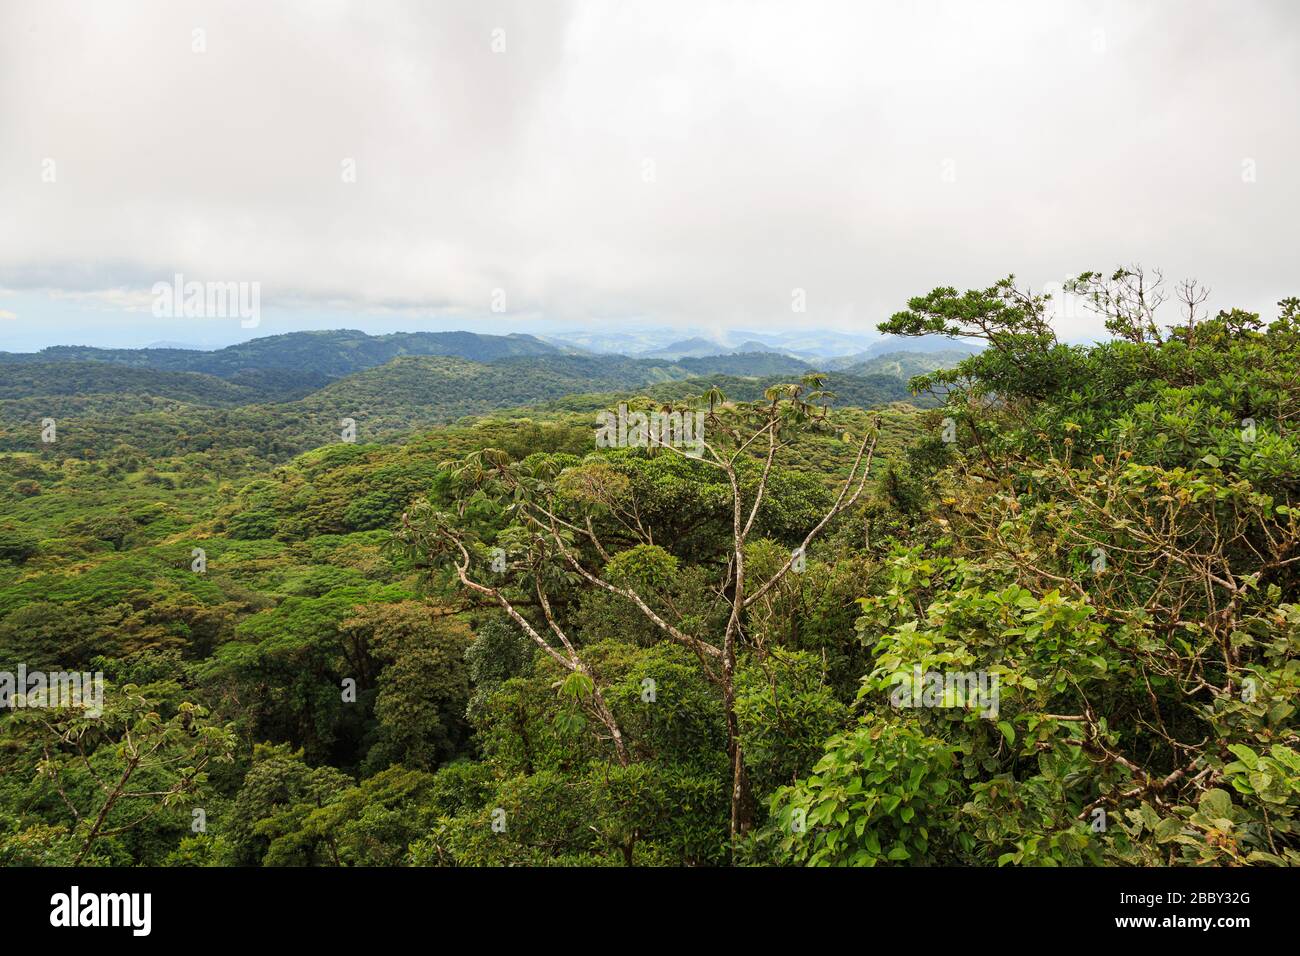 View from the lookout over the forest canopy at the Santa Elena Cloud Forest Reserve in Monteverde, Costa Rica. Stock Photo